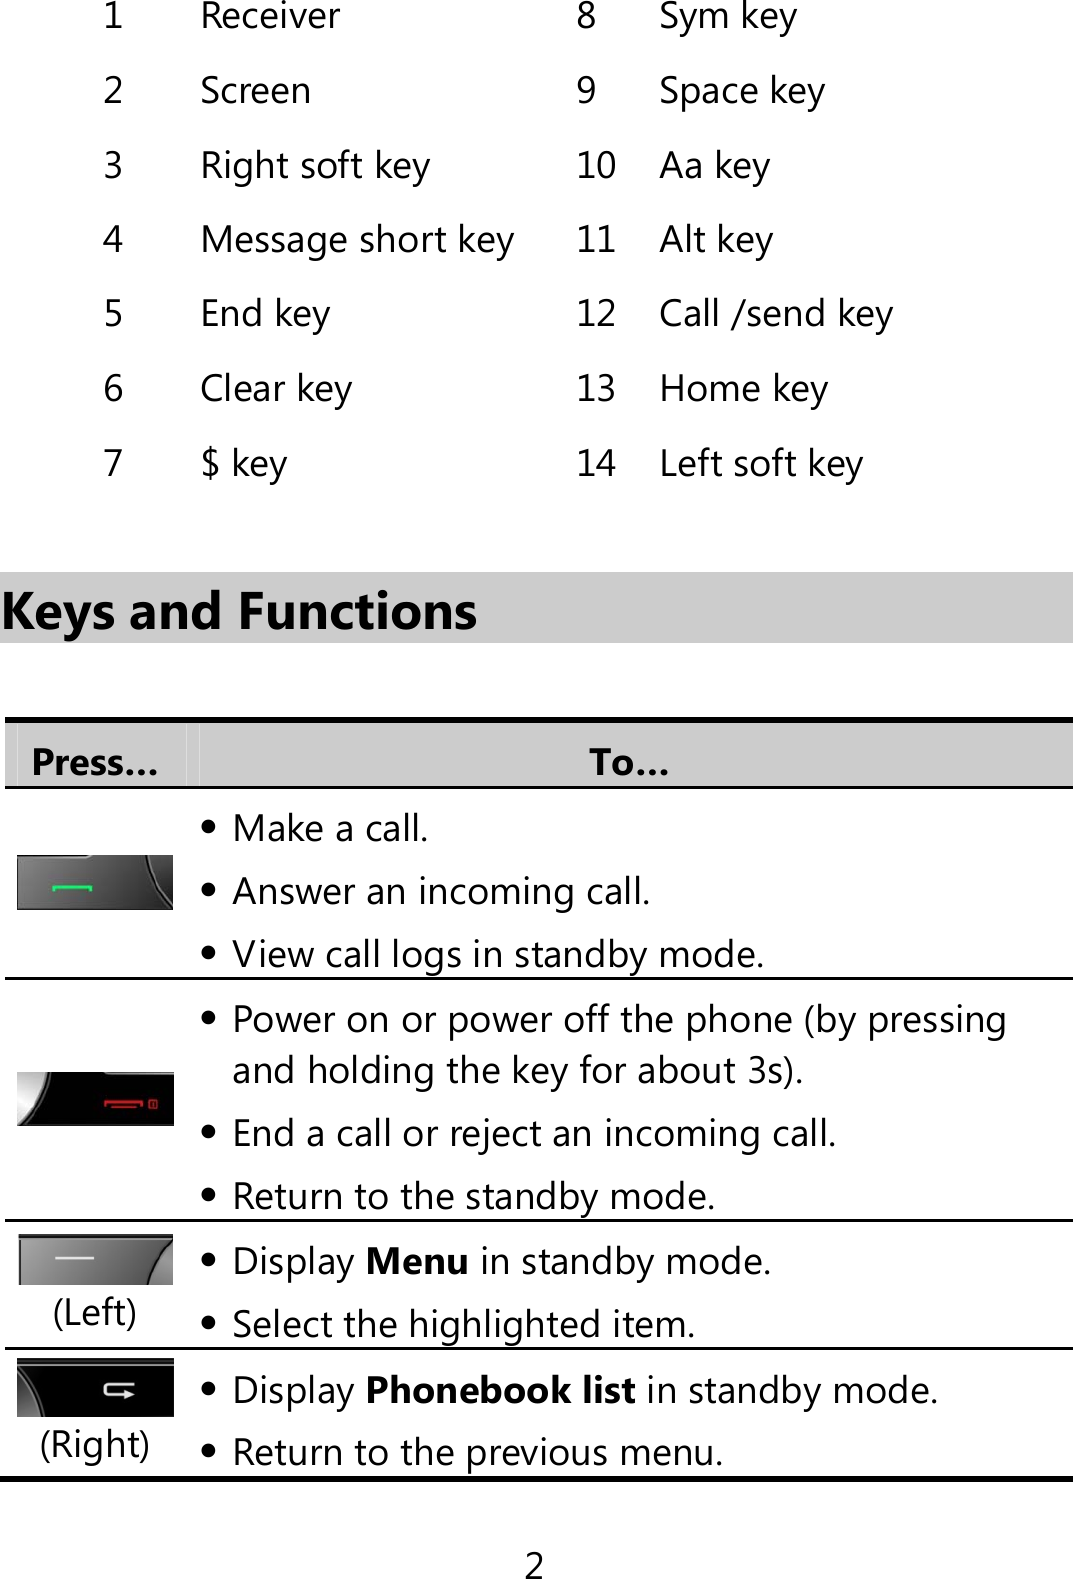 2  Keys and Functions  Press…  To…   Make a call.  Answer an incoming call.  View call logs in standby mode.     Power on or power off the phone (by pressing and holding the key for about 3s).  End a call or reject an incoming call.  Return to the standby mode. (Left)  Display Menu in standby mode.  Select the highlighted item.  (Right)  Display Phonebook list in standby mode.  Return to the previous menu. 1 Receiver  8 Sym key 2 Screen  9 Space key 3  Right soft key  10 Aa key 4  Message short key  11 Alt key 5  End key  12 Call /send key 6  Clear key  13 Home key 7  $ key  14 Left soft key 